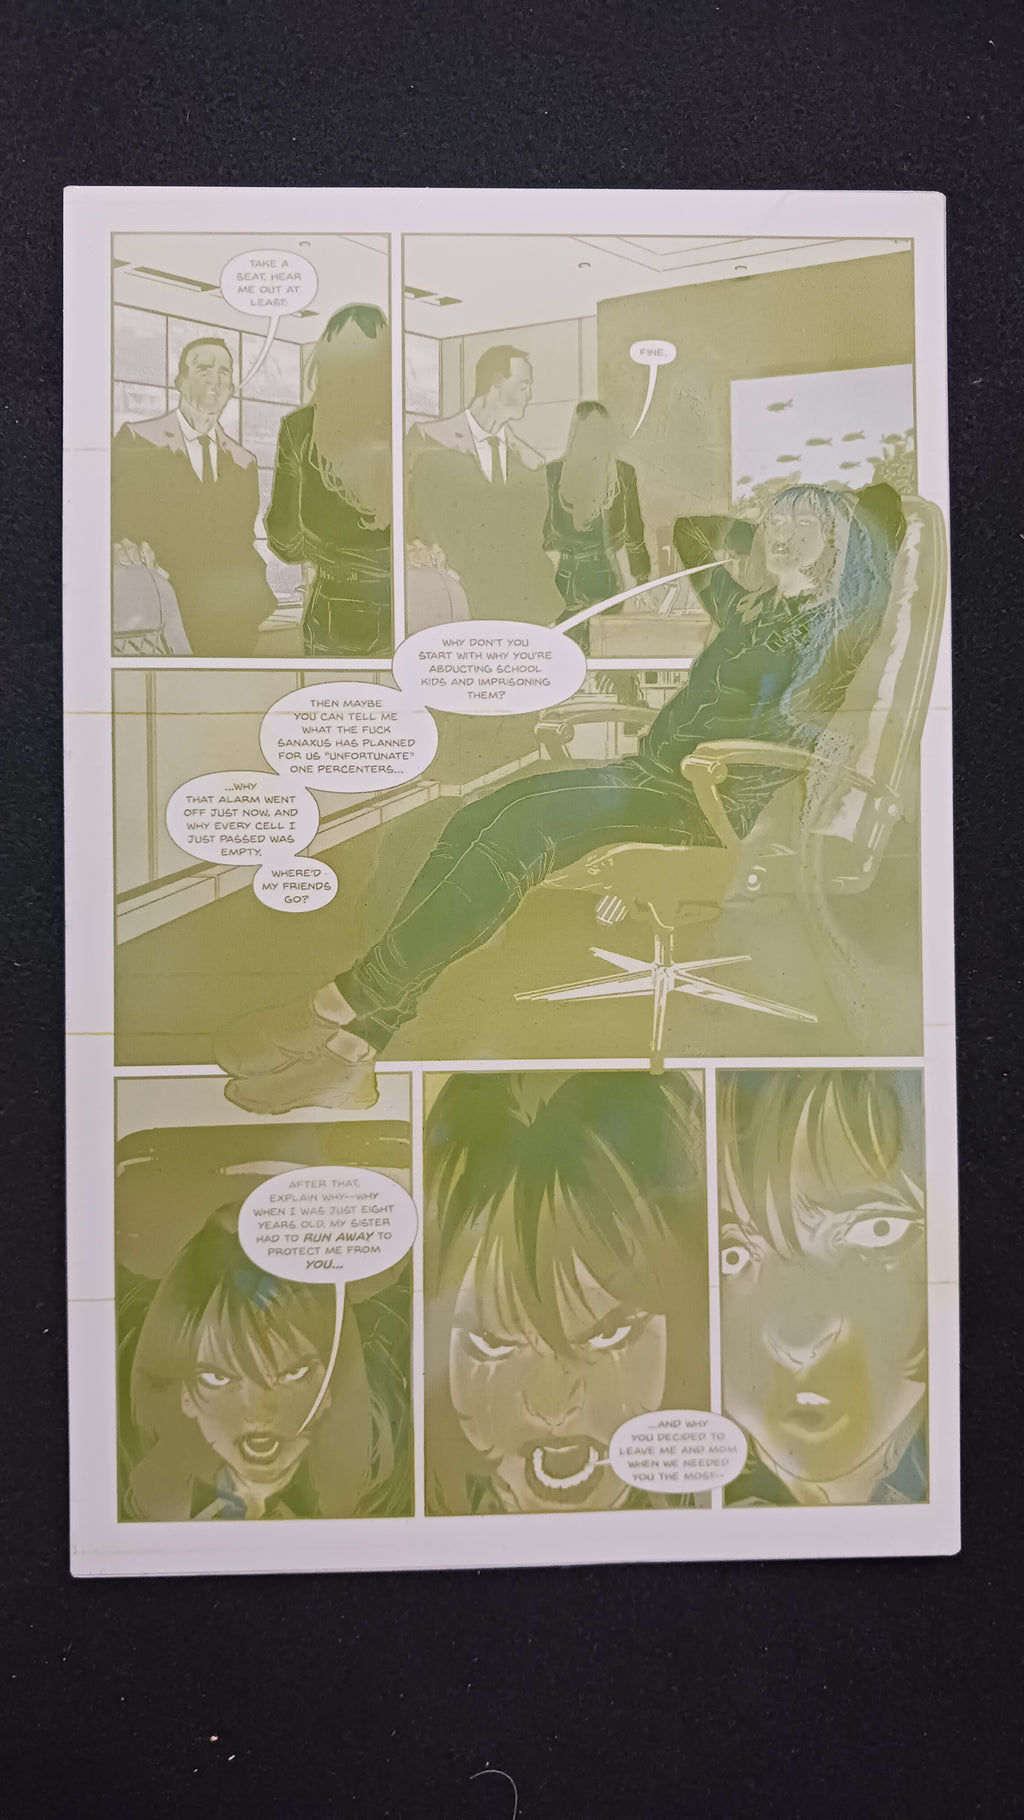 Category Zero Conflict #3 - Page 8 - PRESSWORKS - Comic Art - Printer Plate - Yellow